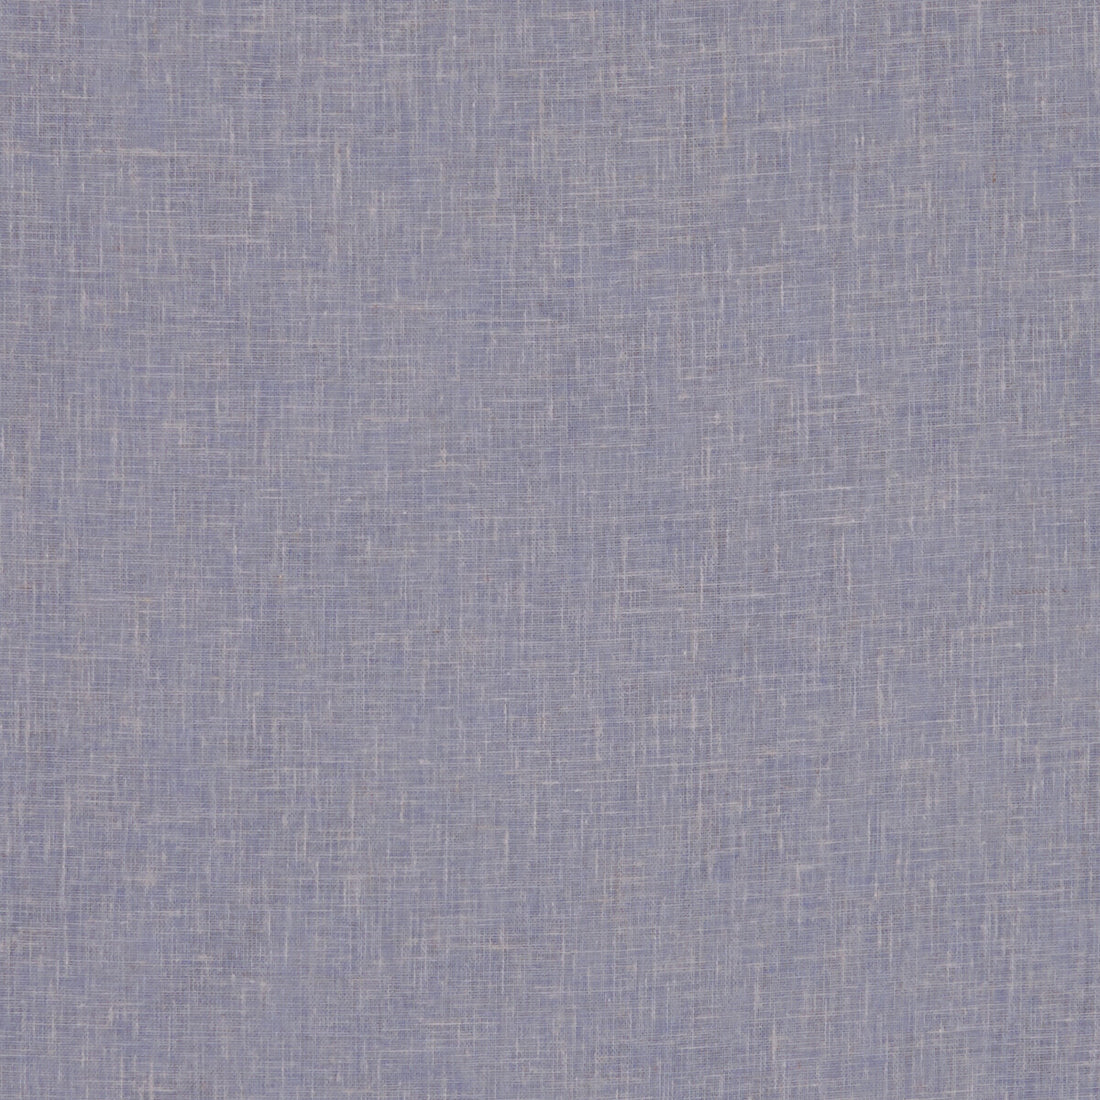 Midori fabric in lavender color - pattern F1068/23.CAC.0 - by Clarke And Clarke in the Clarke &amp; Clarke Midori collection